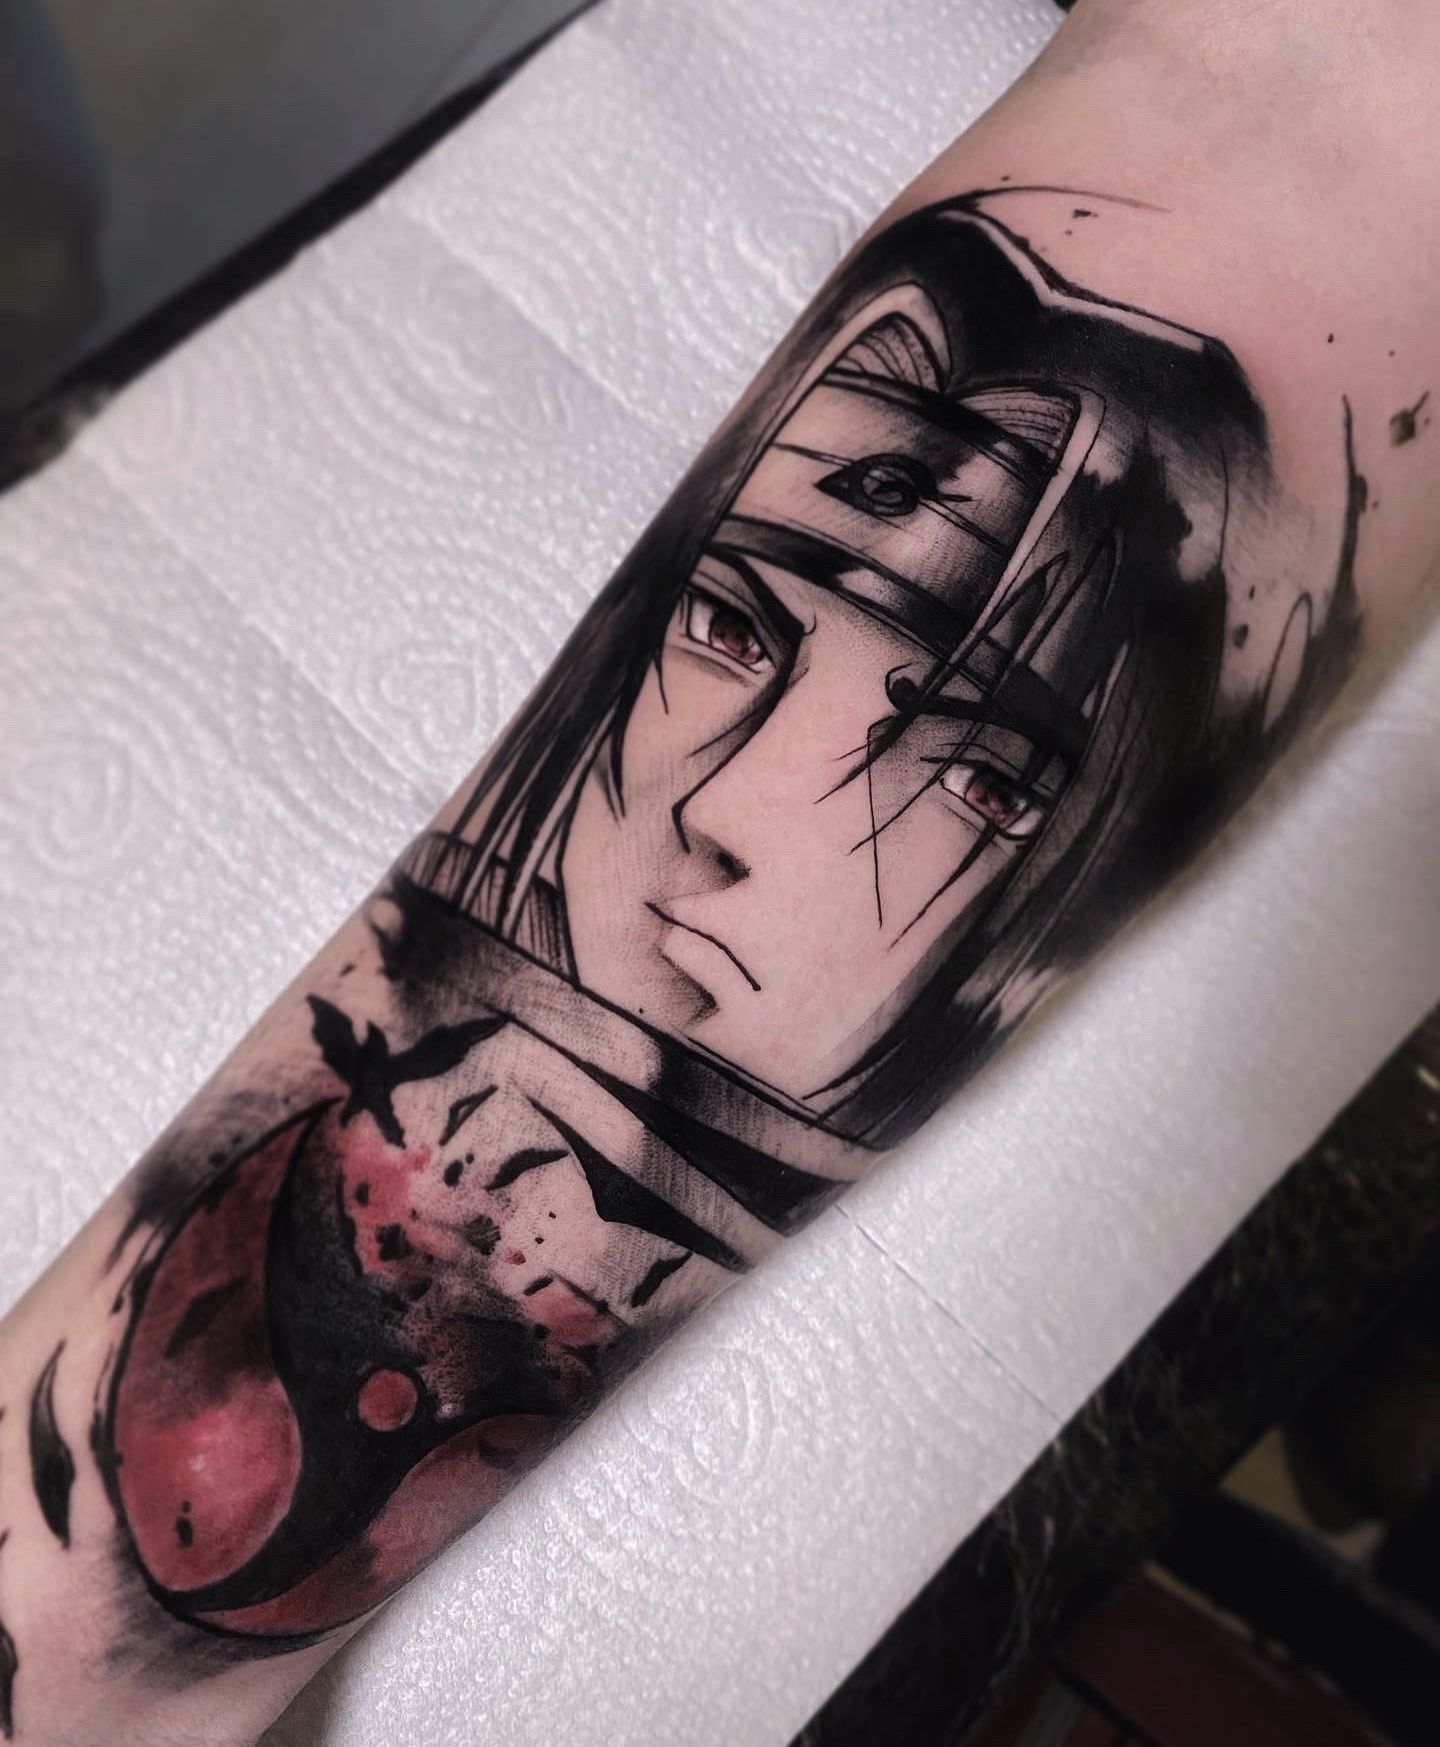 Tattoo uploaded by Willian Muller • • Itachi. #naruto #narutotattoo  #animetattoo #itachi #uchihaitachi #itachitattoo #anime #animemaster •  Tattoodo